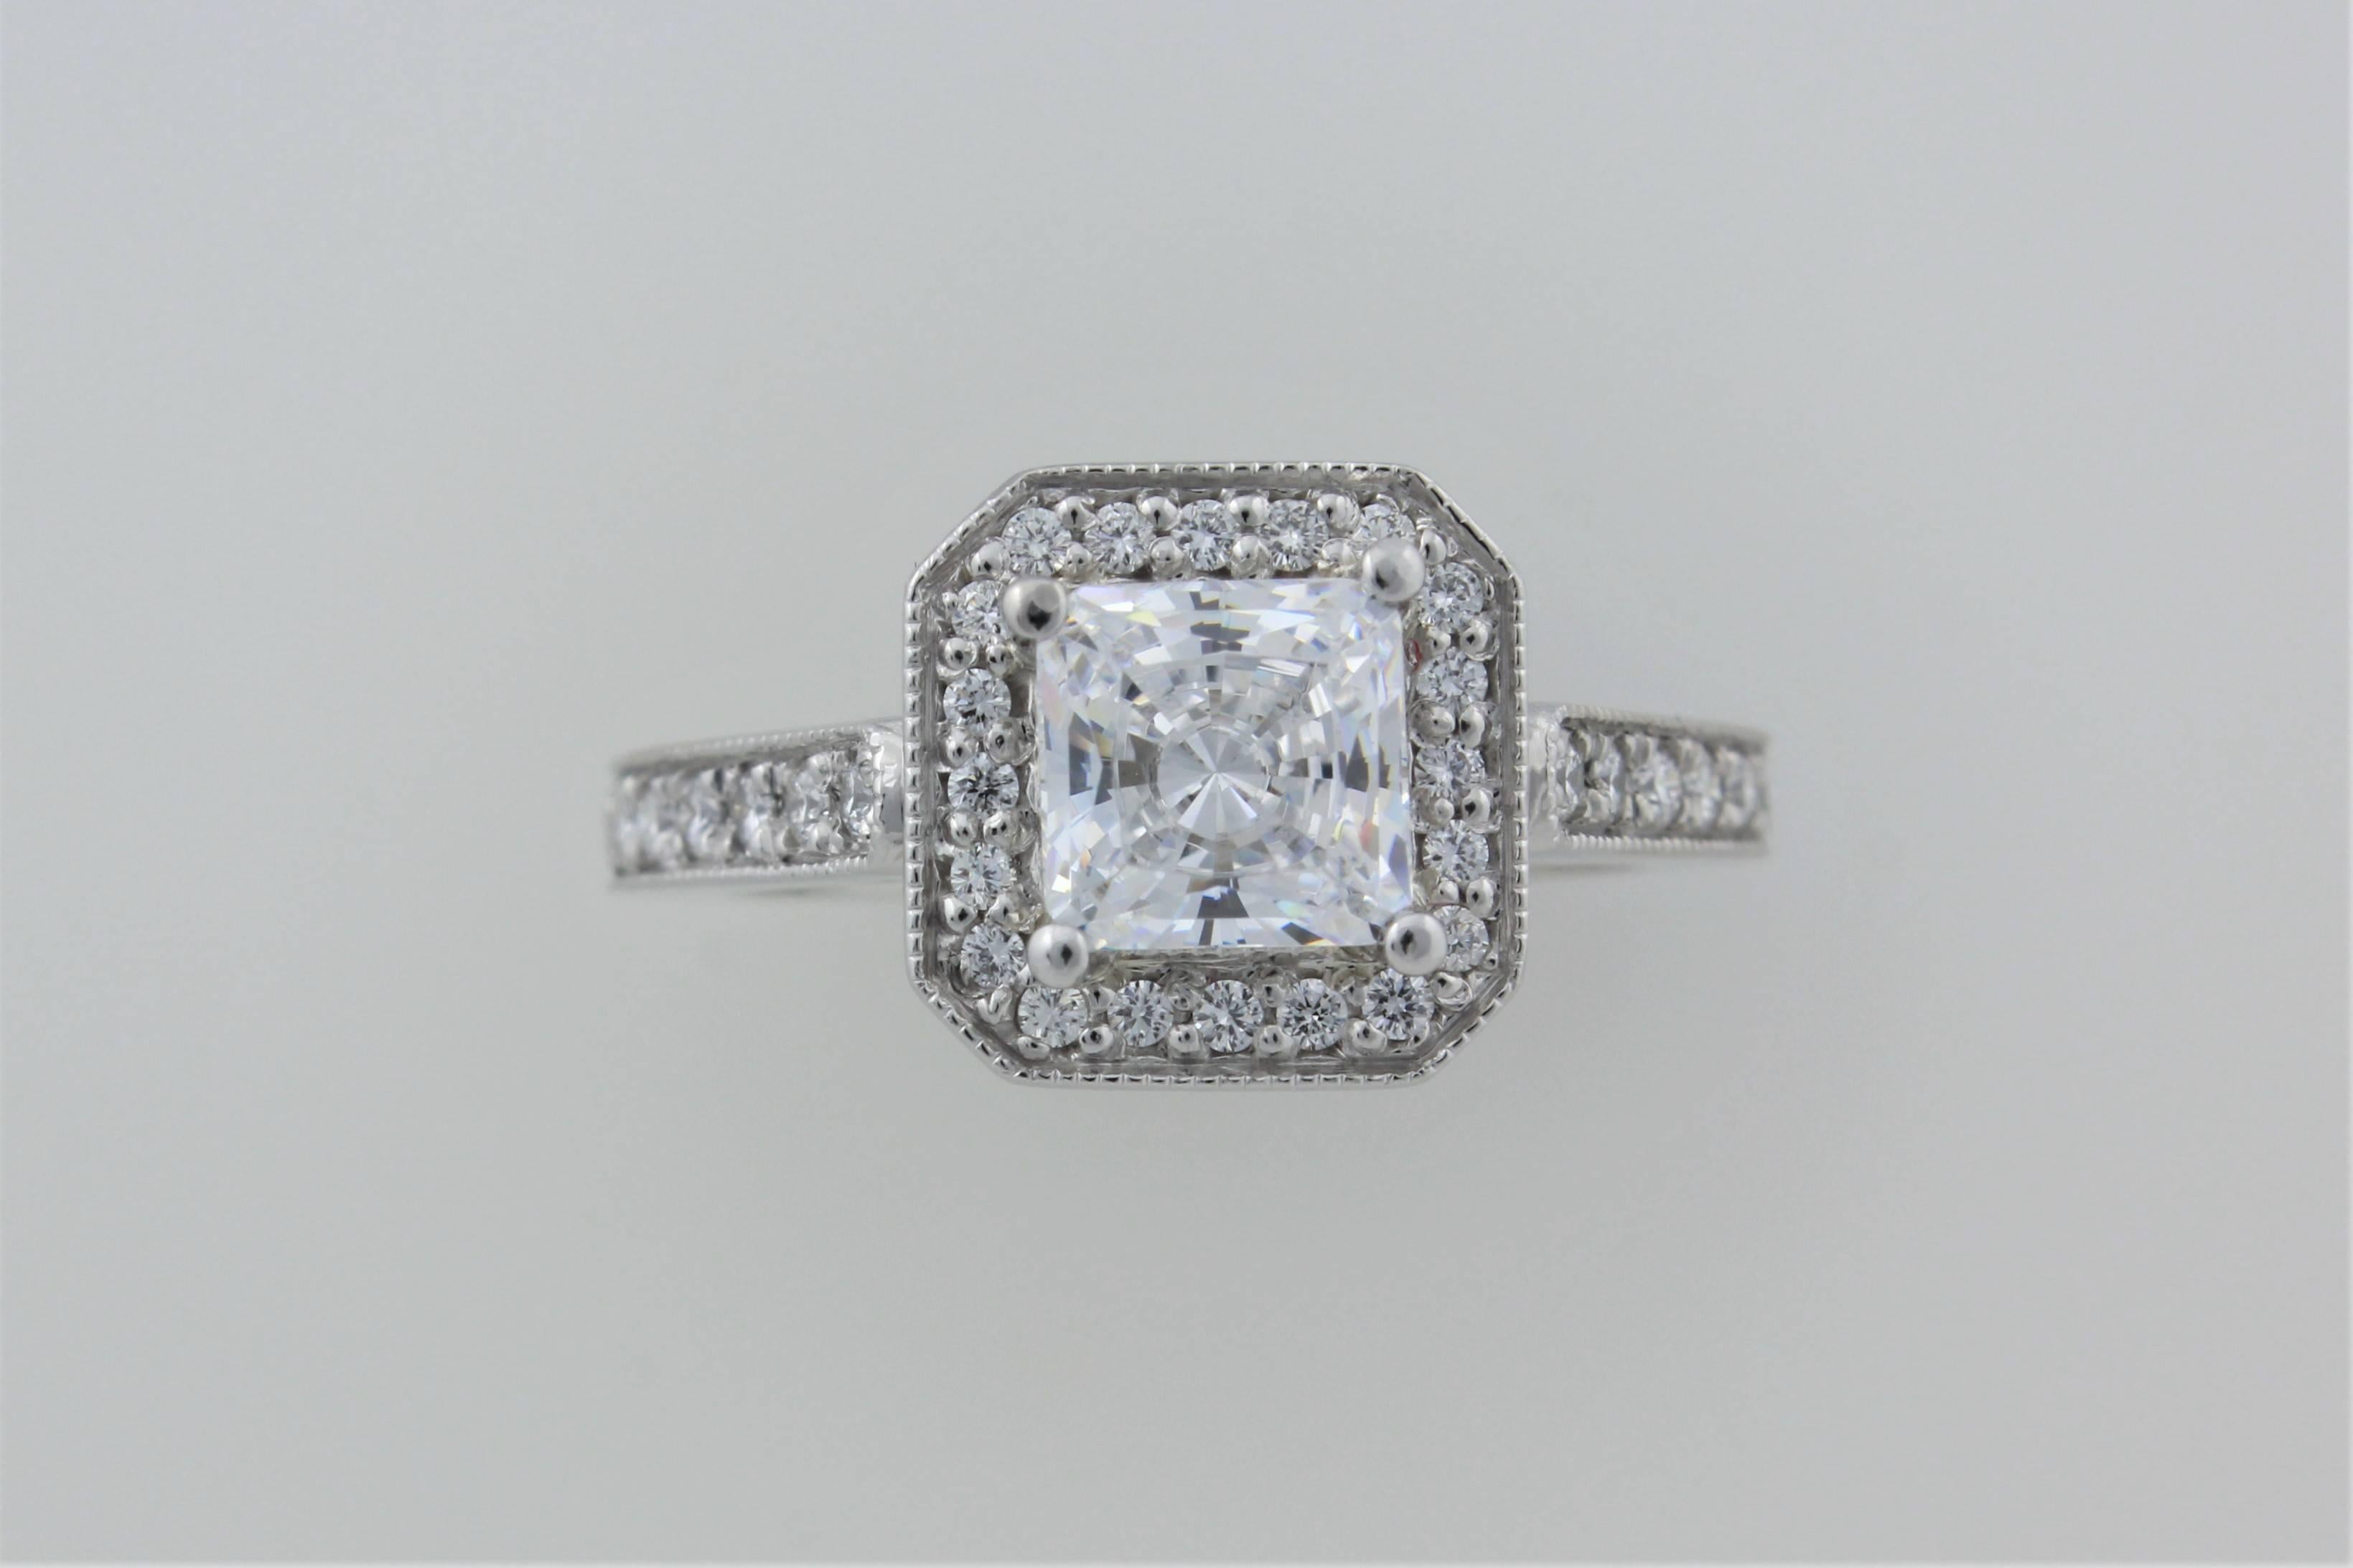 Here is a beautiful platinum Precision Set, halo style, flush fit ring mounting with .35 carats of G-H Color, VS clarity diamonds.  The center is a cubic zirconia so this is a perfect ring to reset your center diamond into a new frame or to wear as